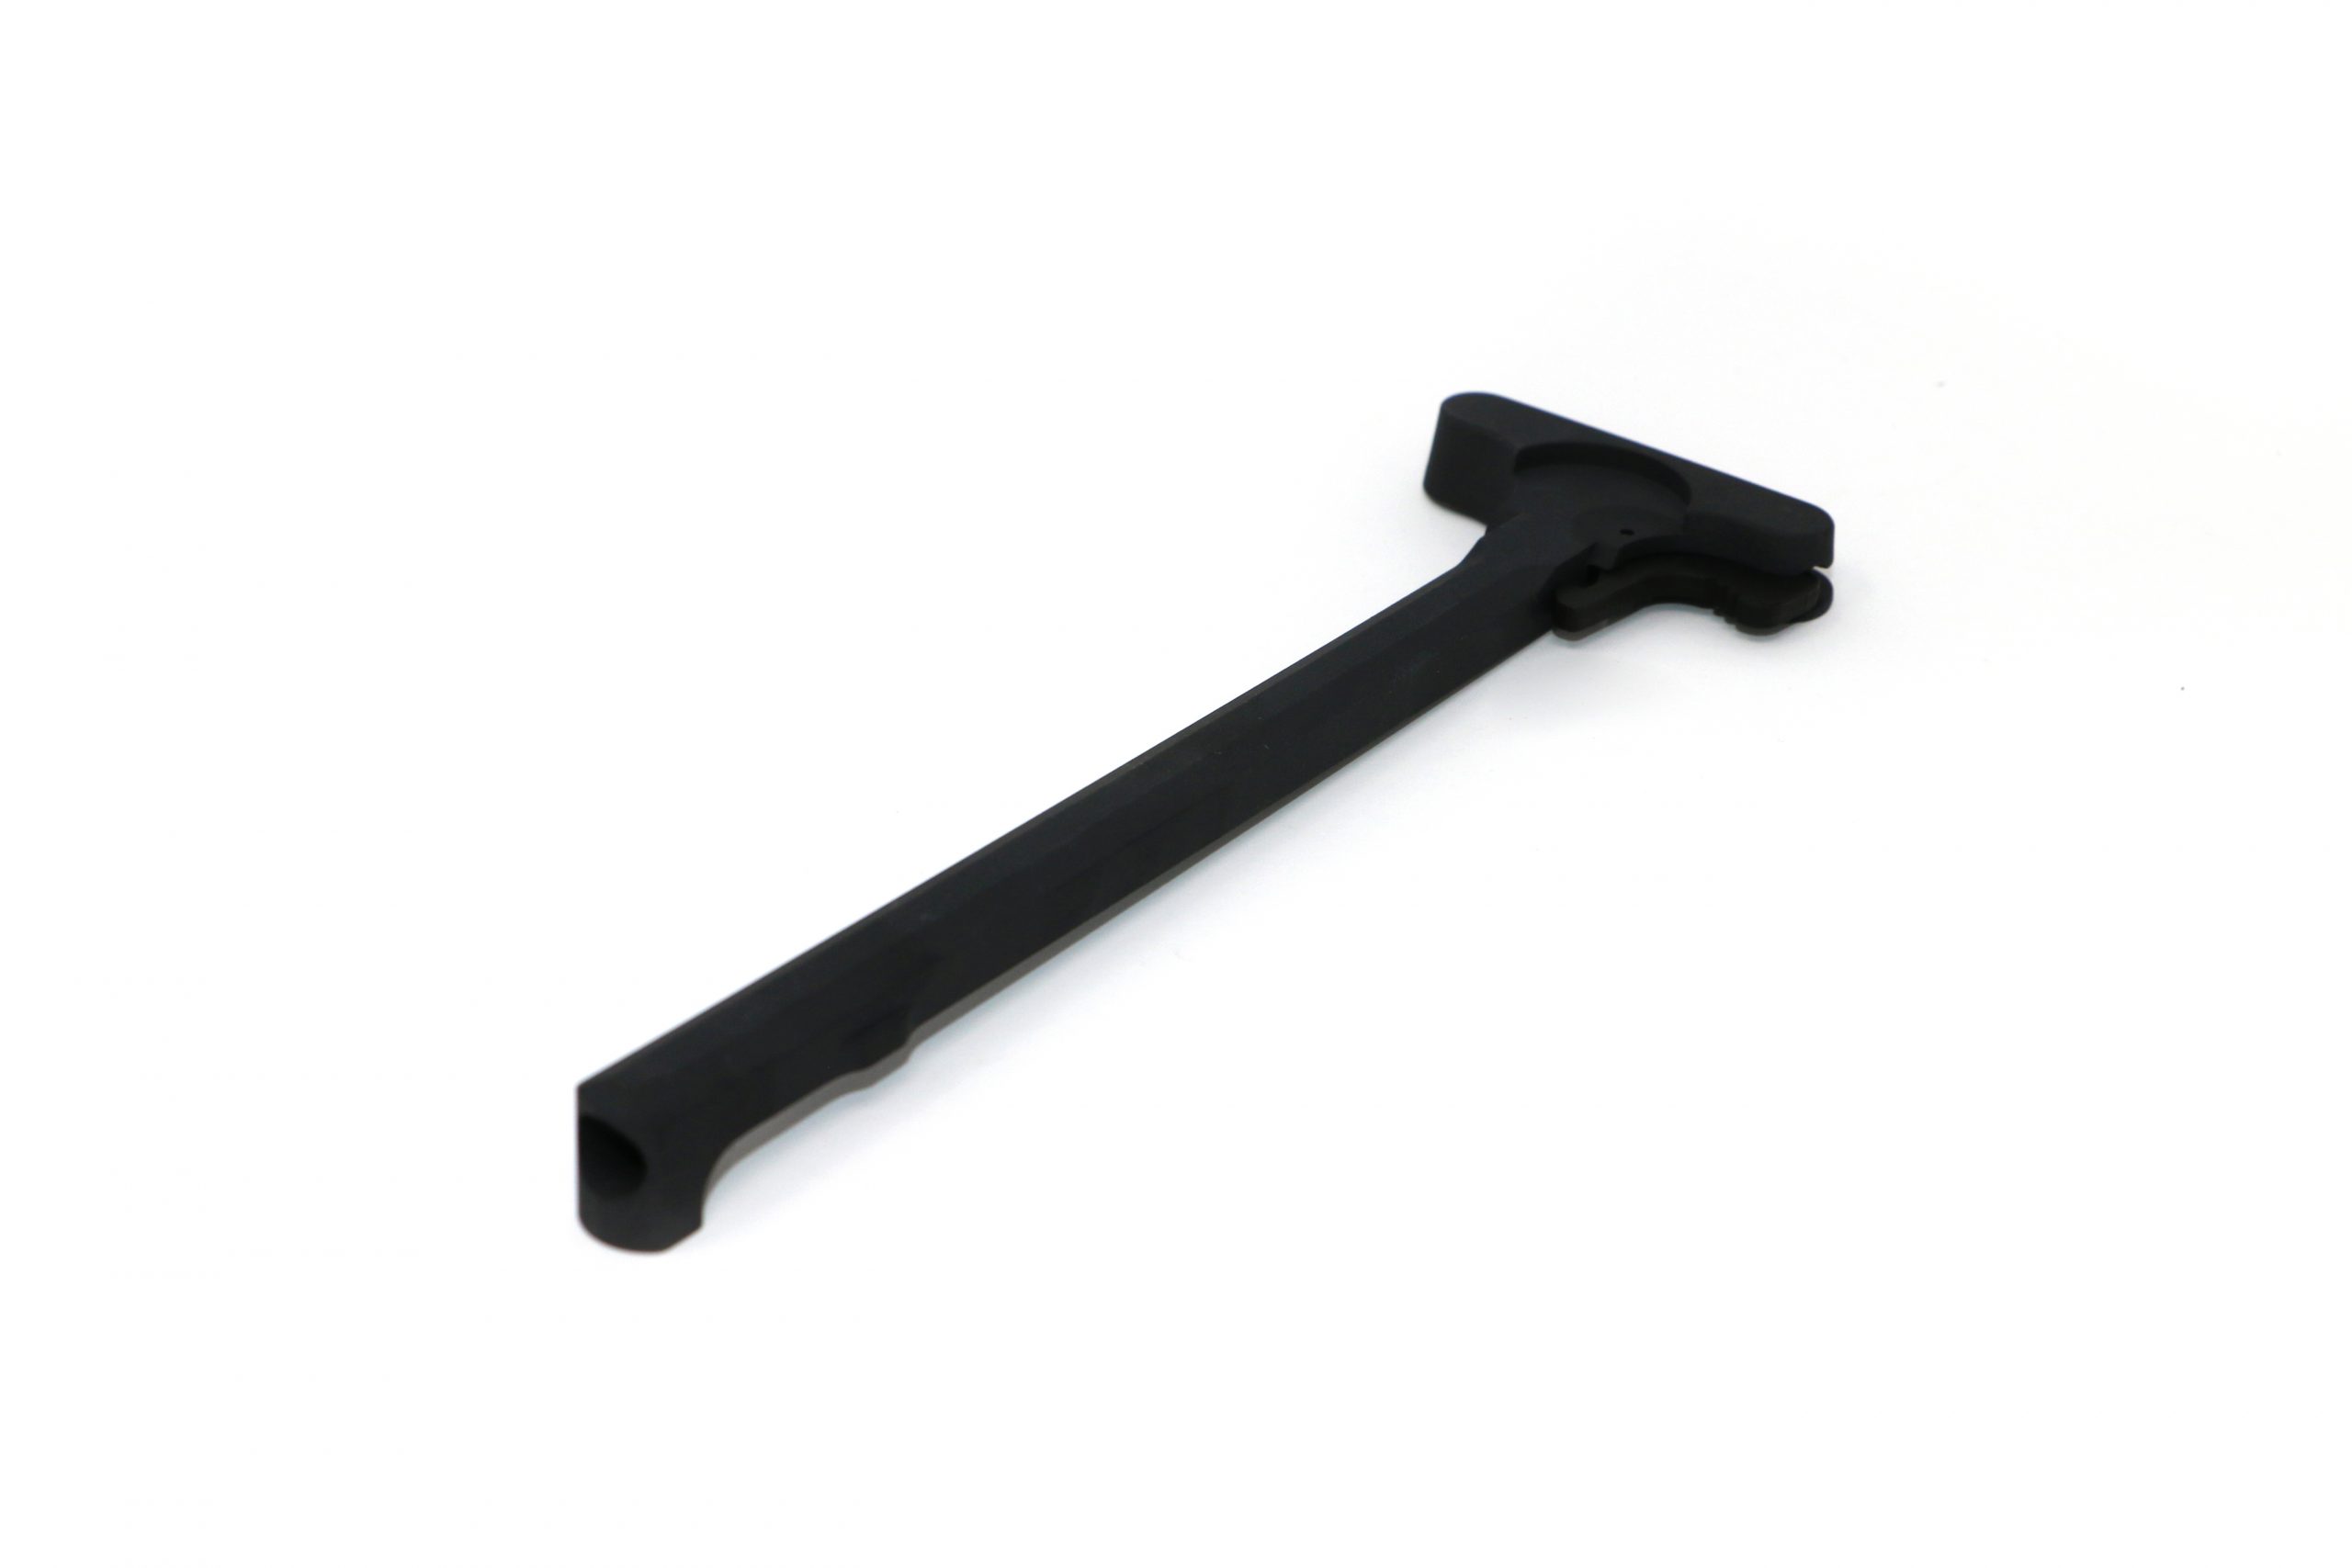 Charging-Handle-2-scaled-1